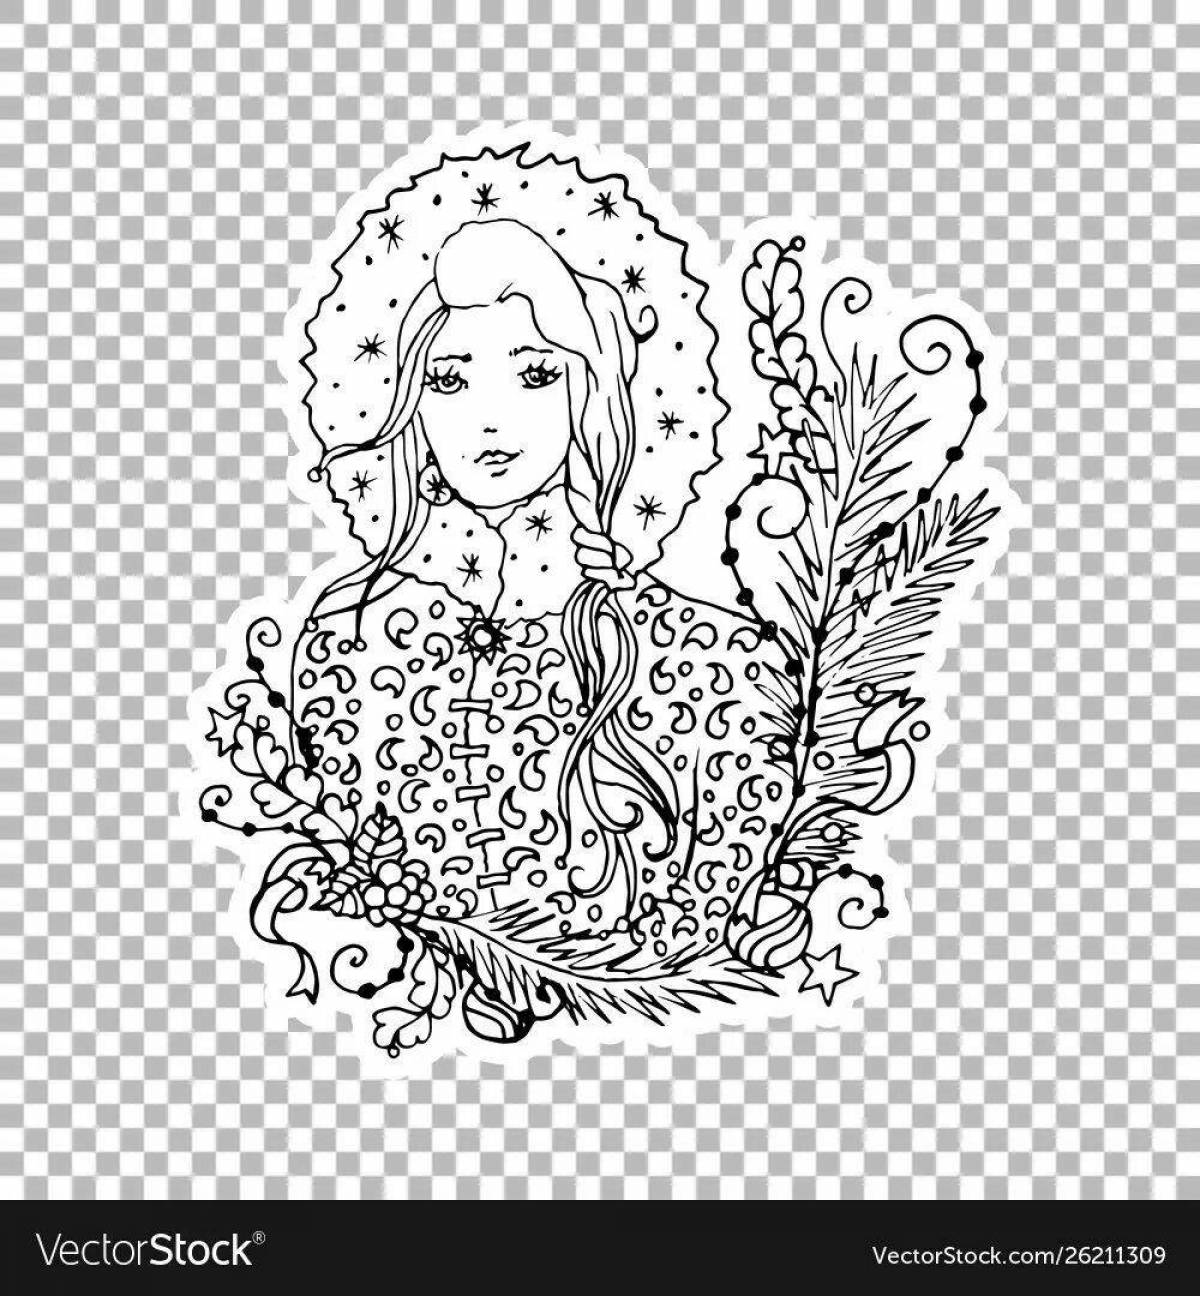 Coloring the gorgeous face of the snow maiden